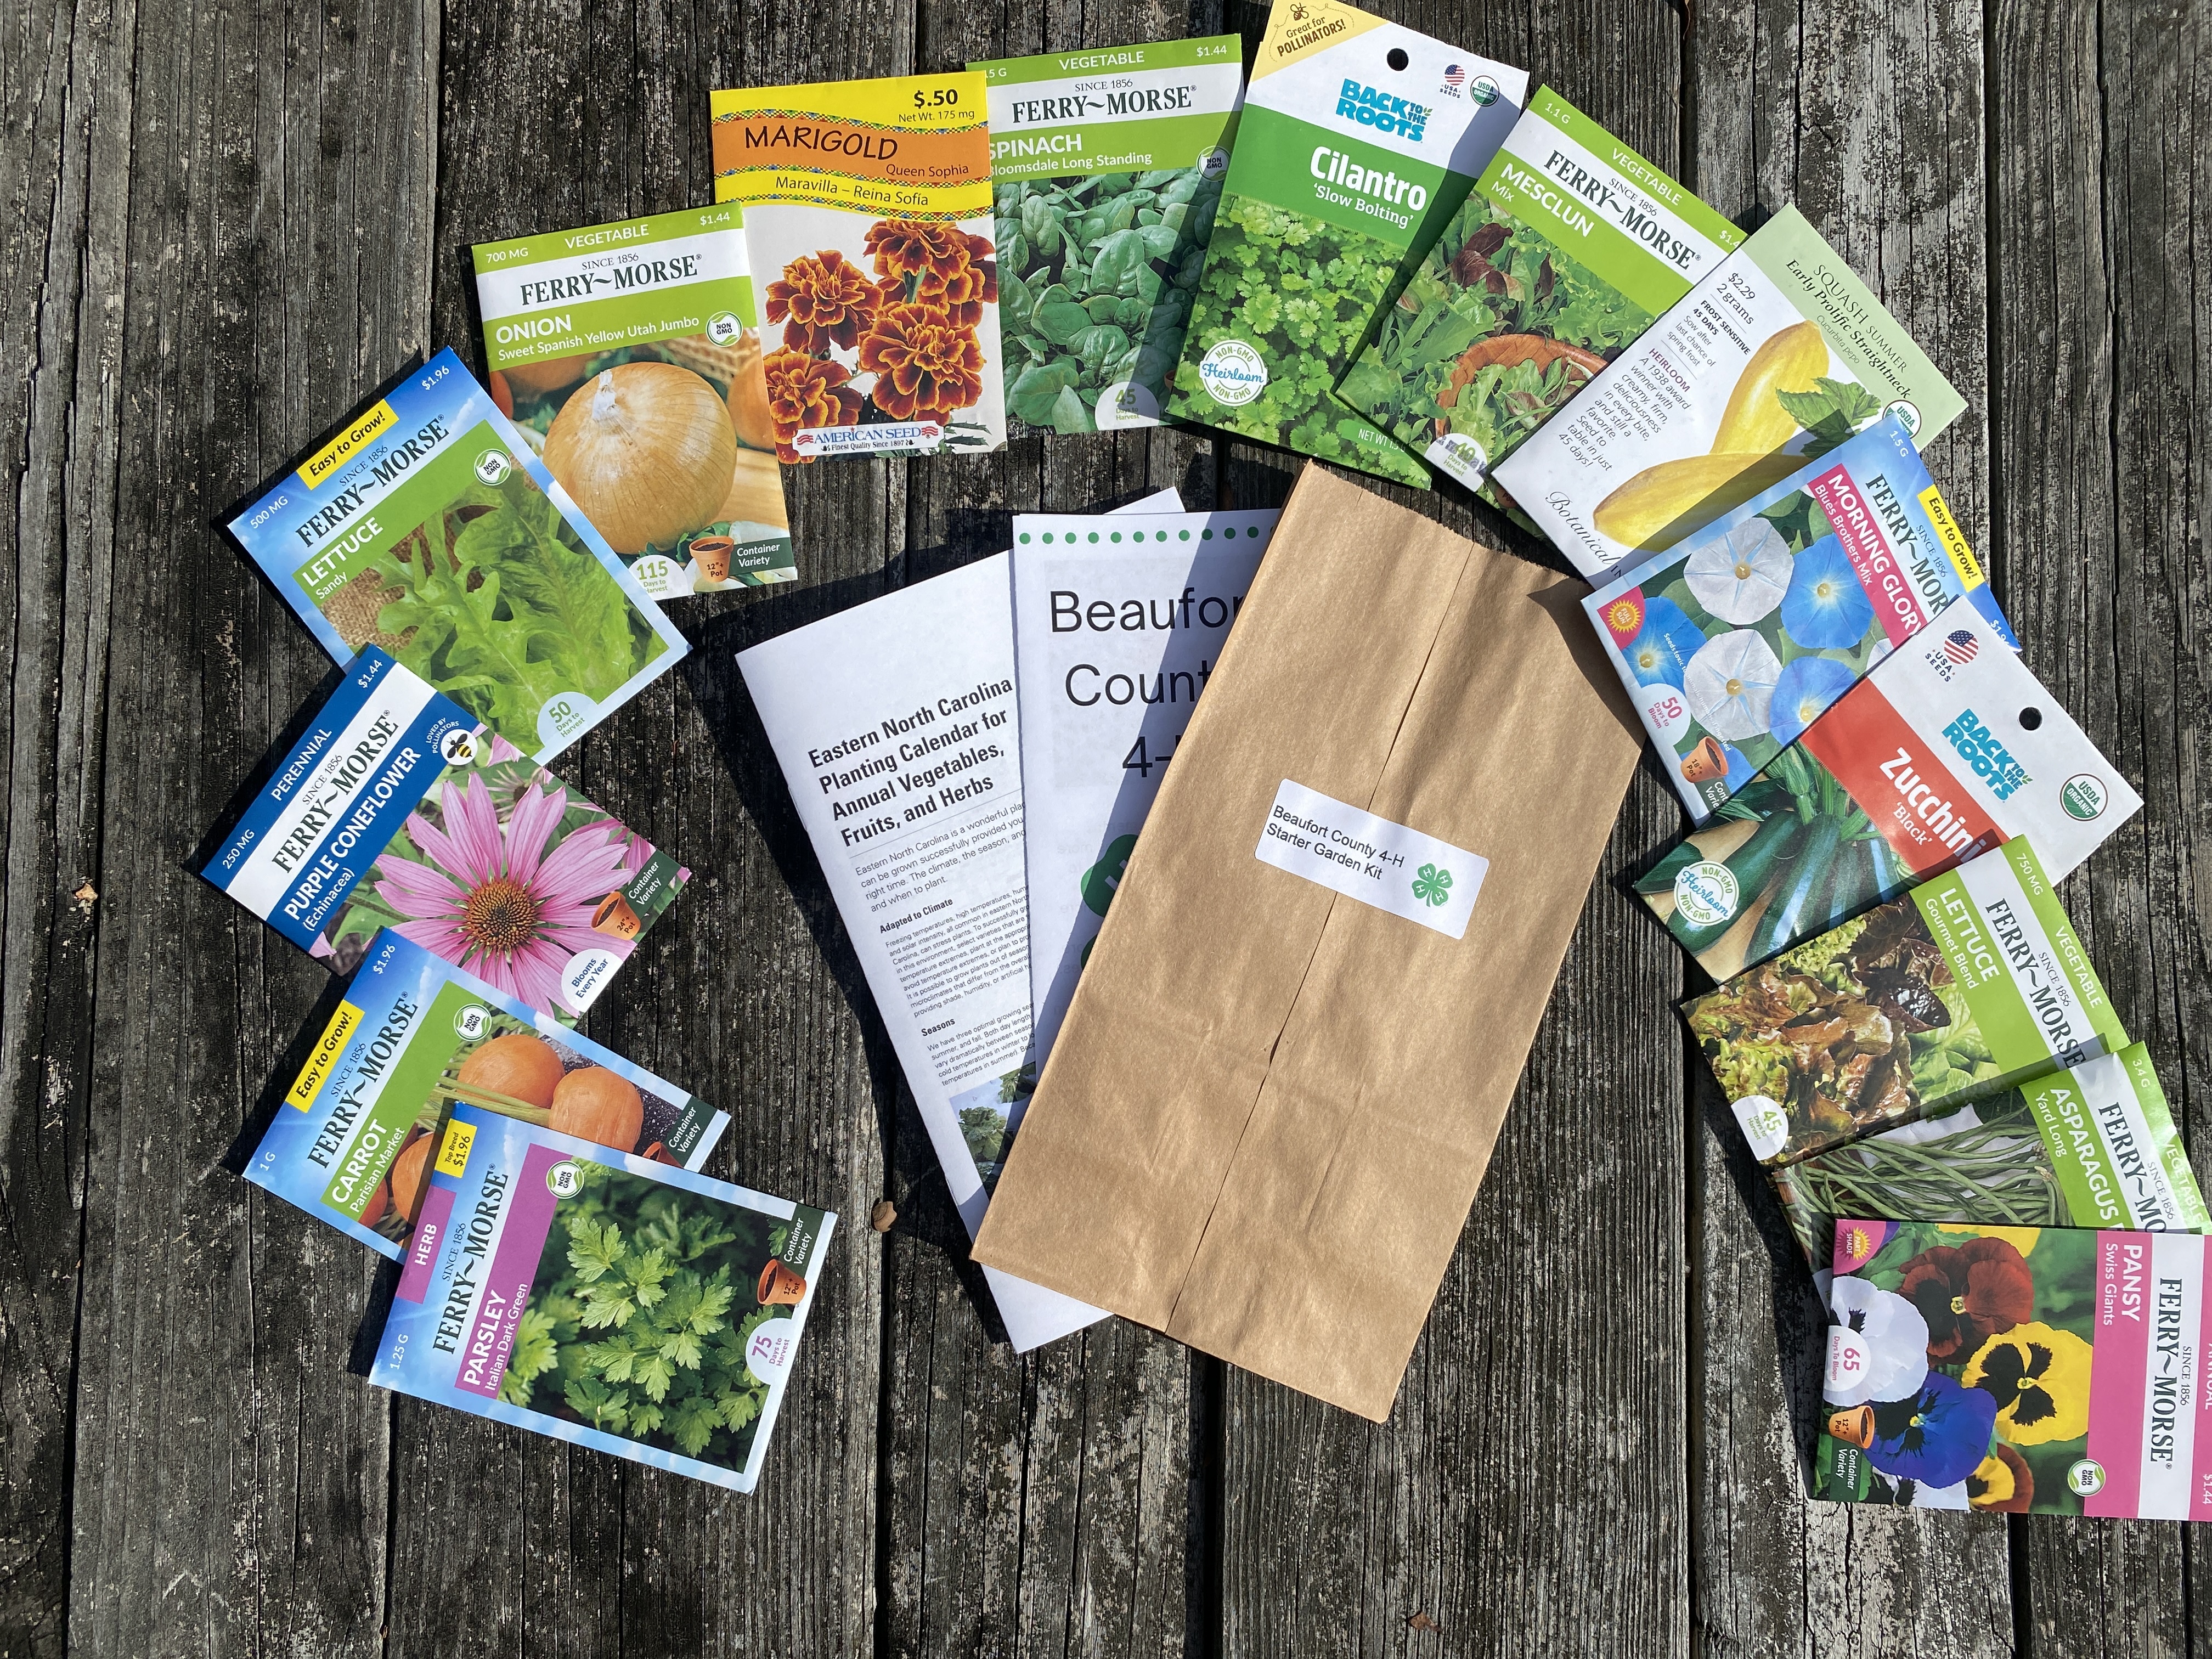 Picture of seed packets